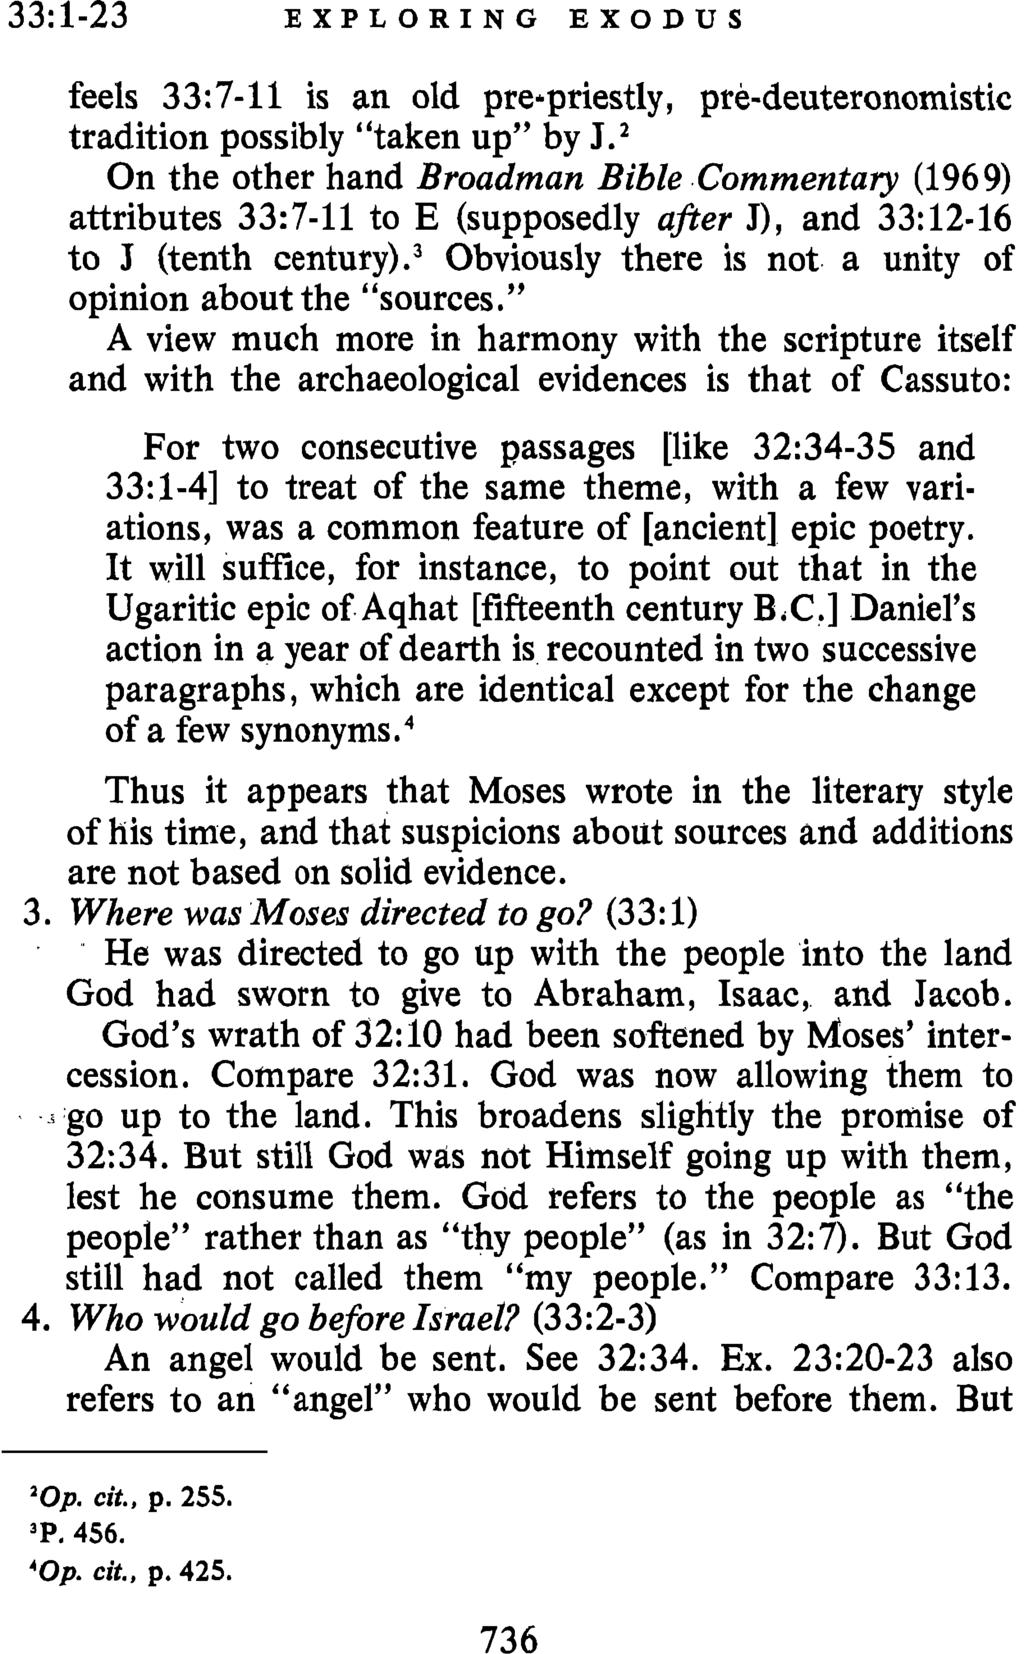 33:l-23 EXPLORING EXODUS feels 33:7-11 is an old prehpriestly, pre-deuteronomistic tradition possibly taken up by J.